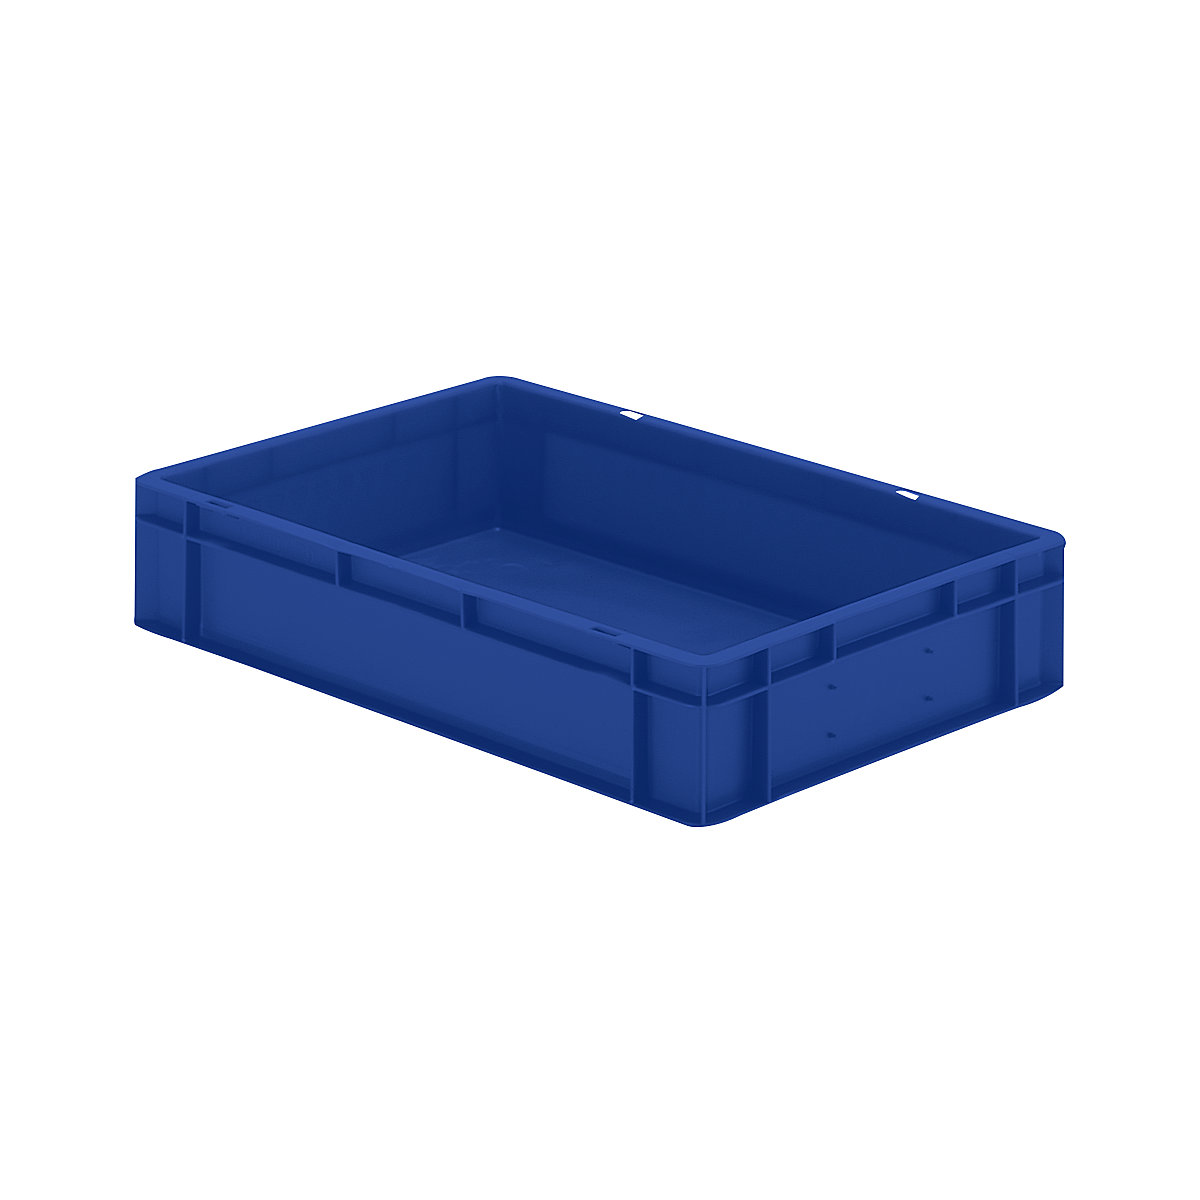 Euro stacking container, closed walls and base, LxWxH 600 x 400 x 120 mm, blue, pack of 5